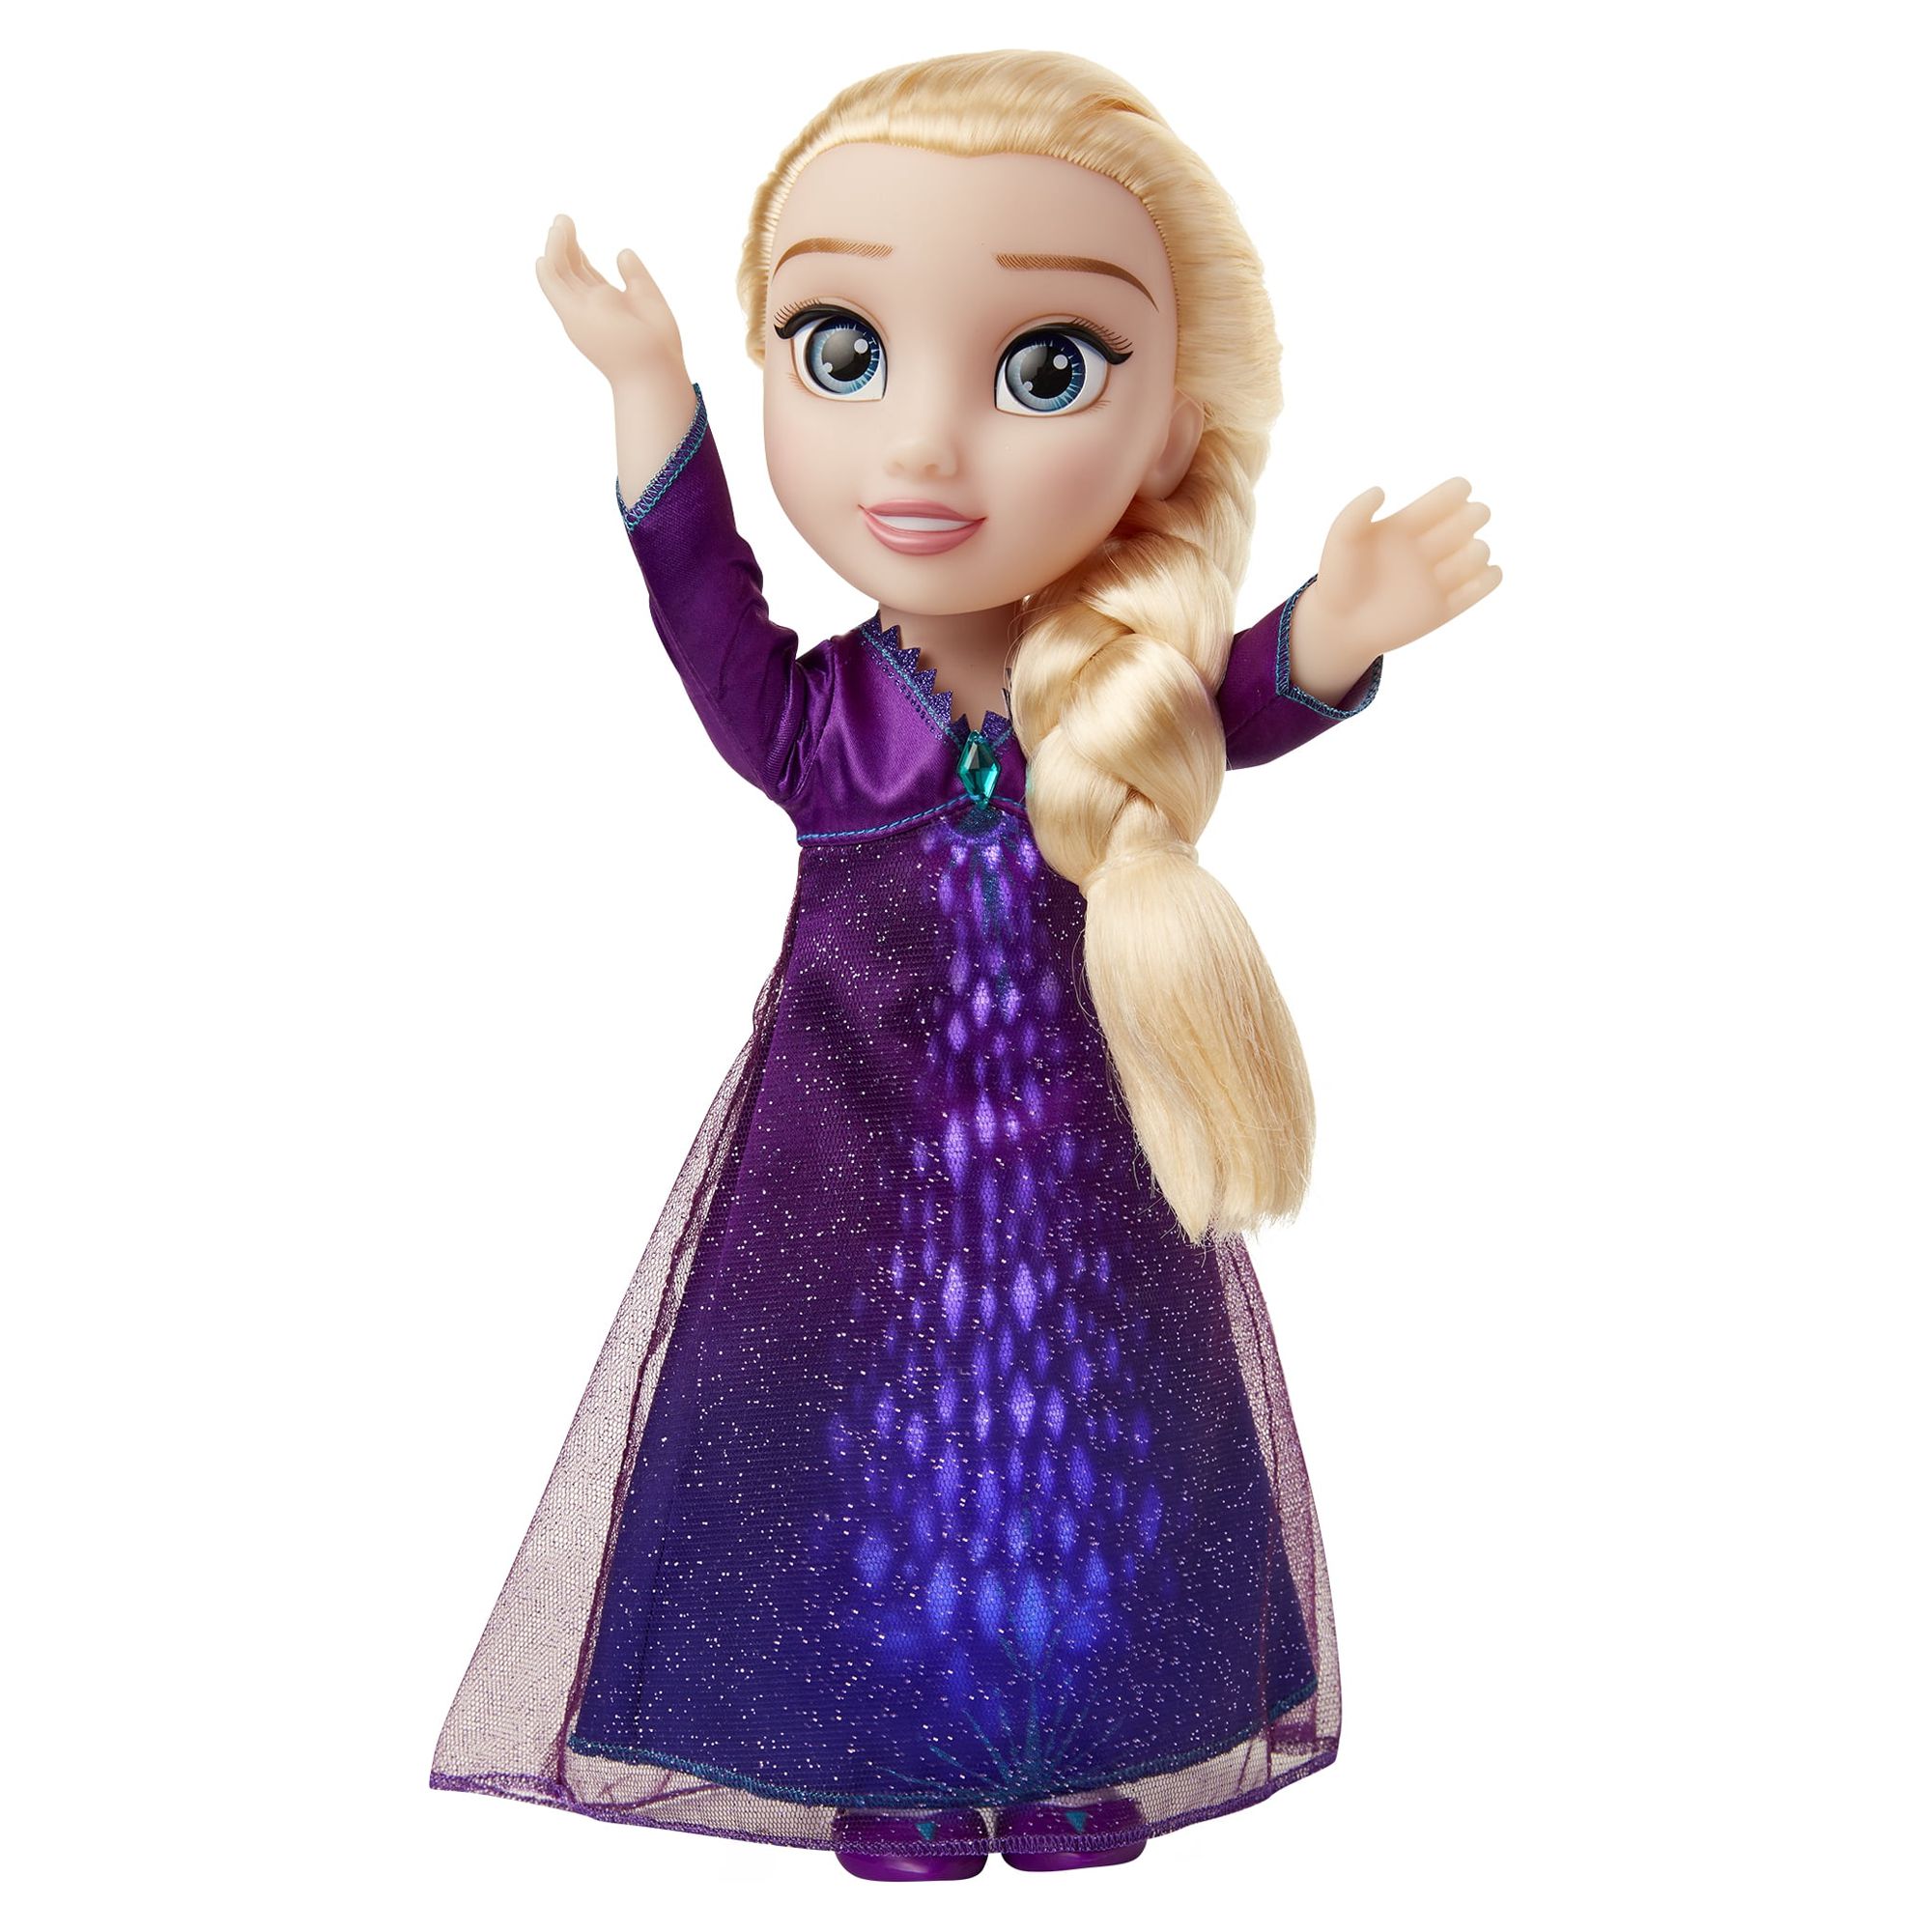 Disney Frozen 207031-V1 2 Elsa Musical Doll Sings Into the Unknown, Features 14 Film Phrases, 14" - image 3 of 10